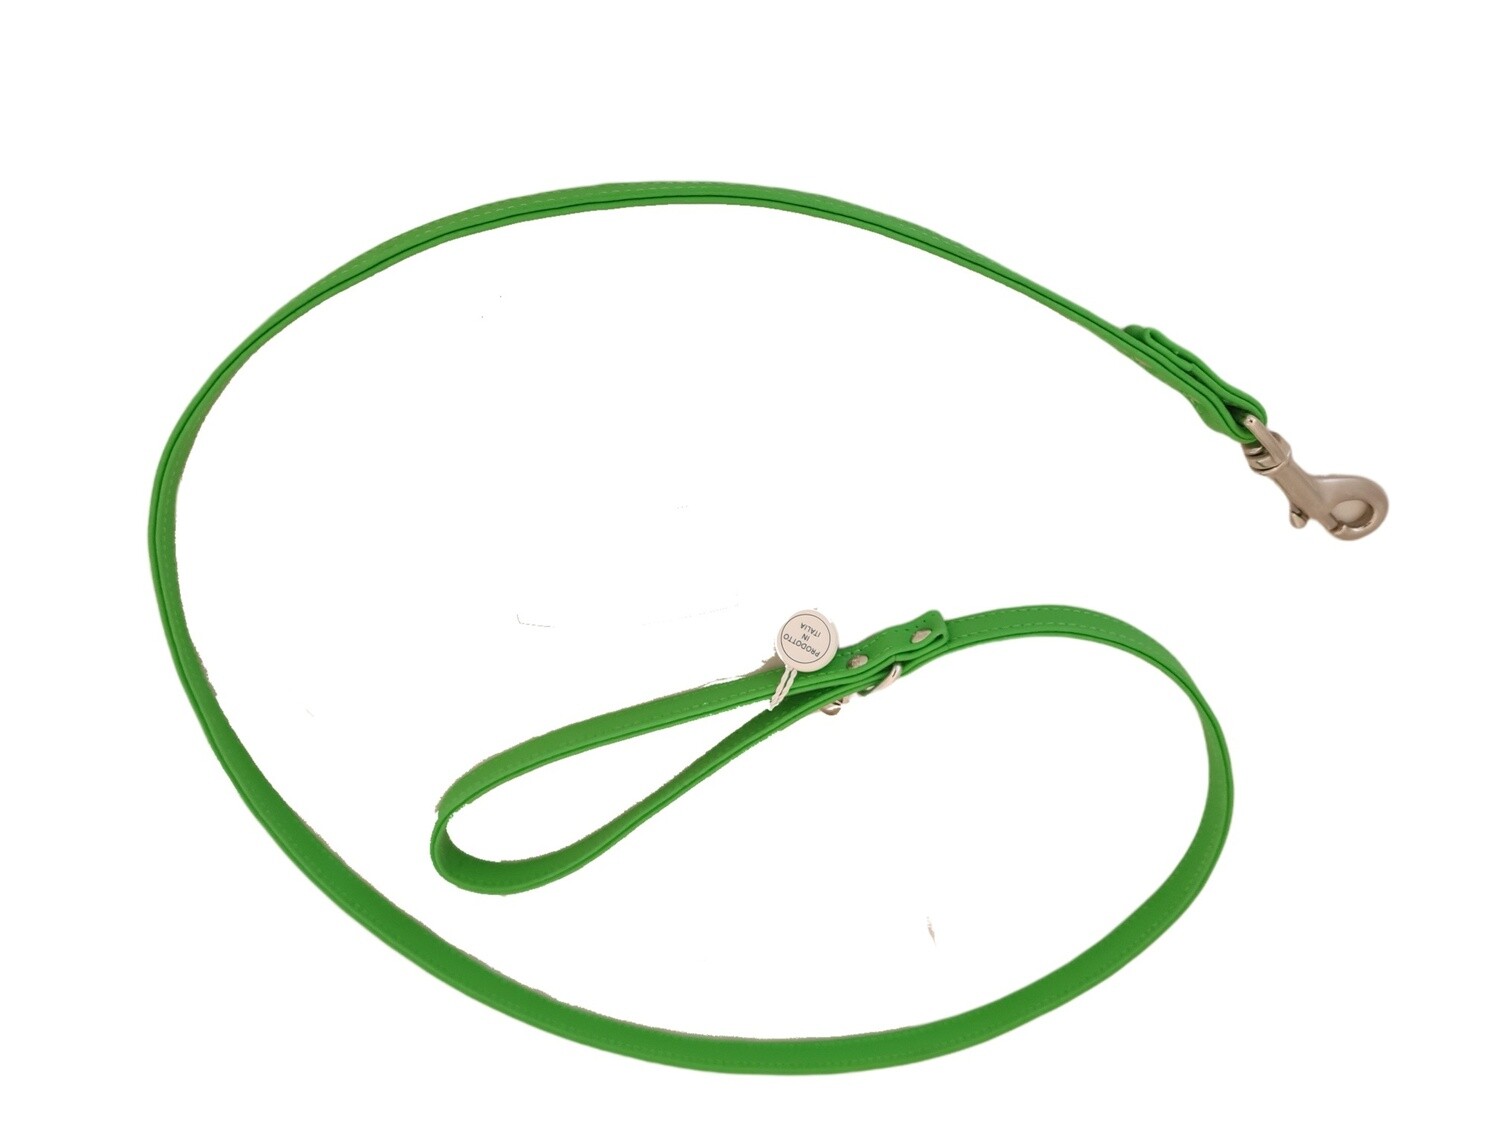 Lione Leash Trilly 09 green - Stock